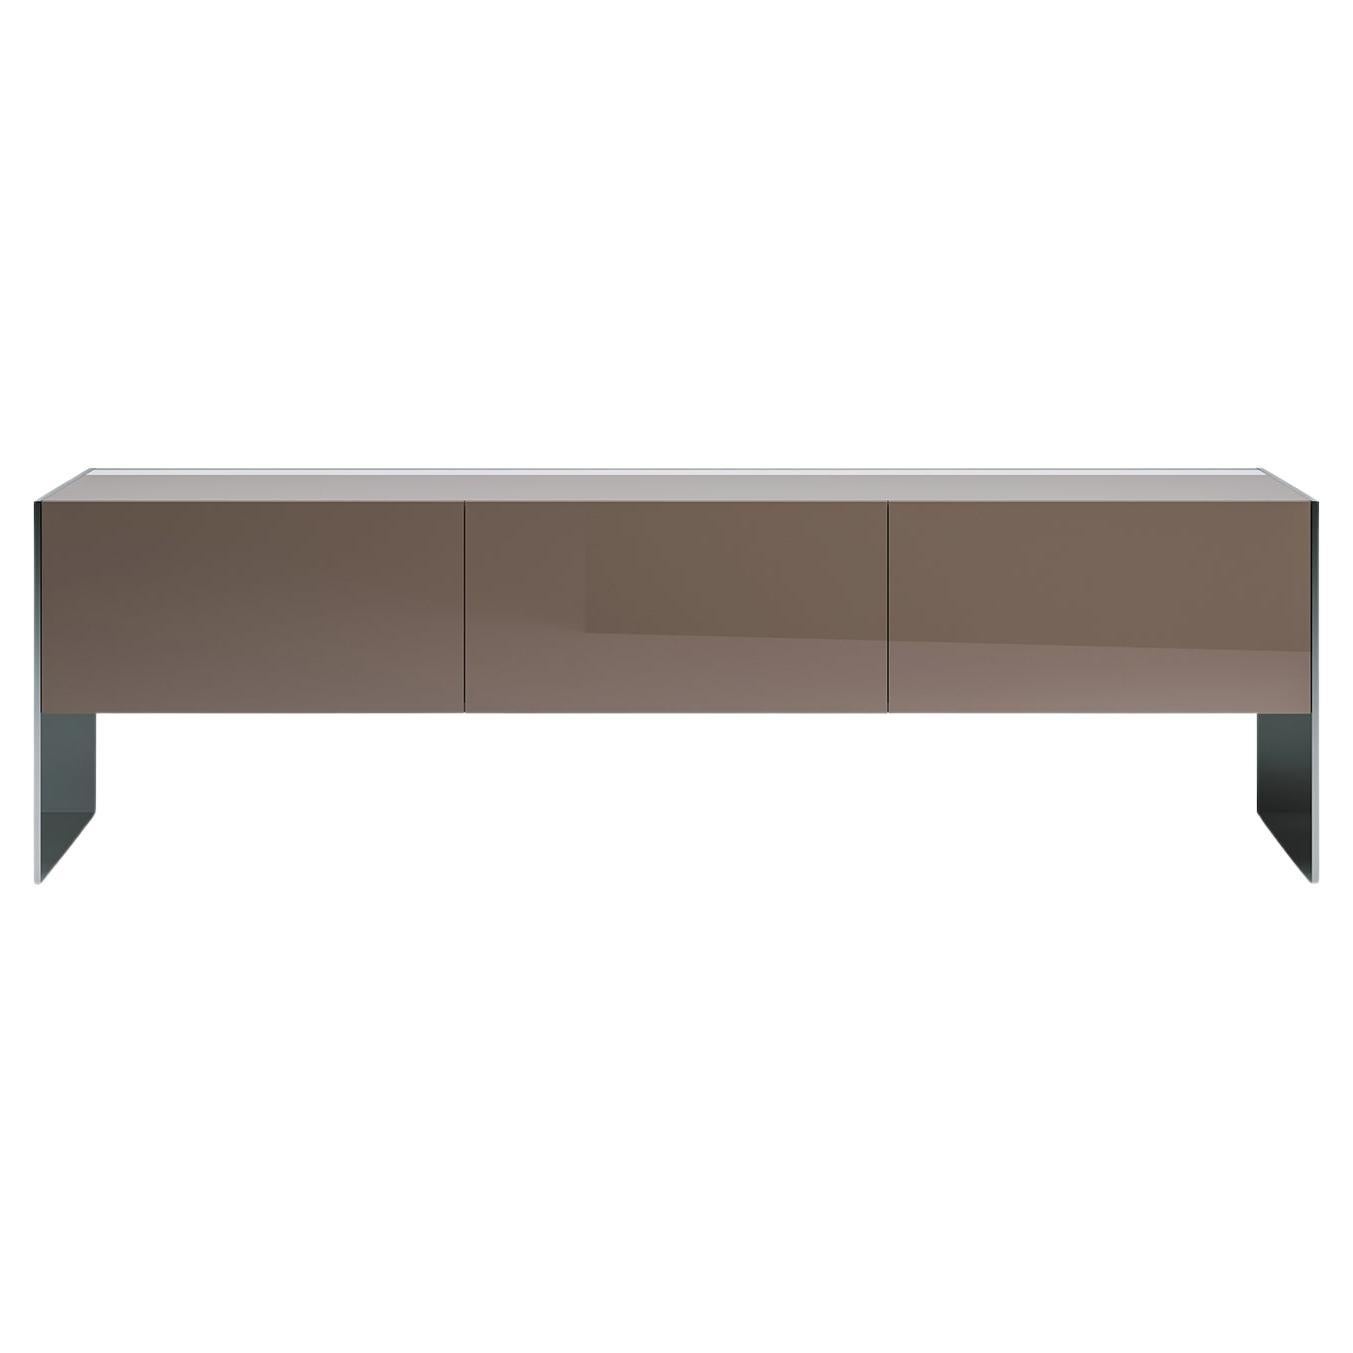 Acerbis Steel Sideboard in Glossy Lacquered Clay Top & Doors with Steel Sides